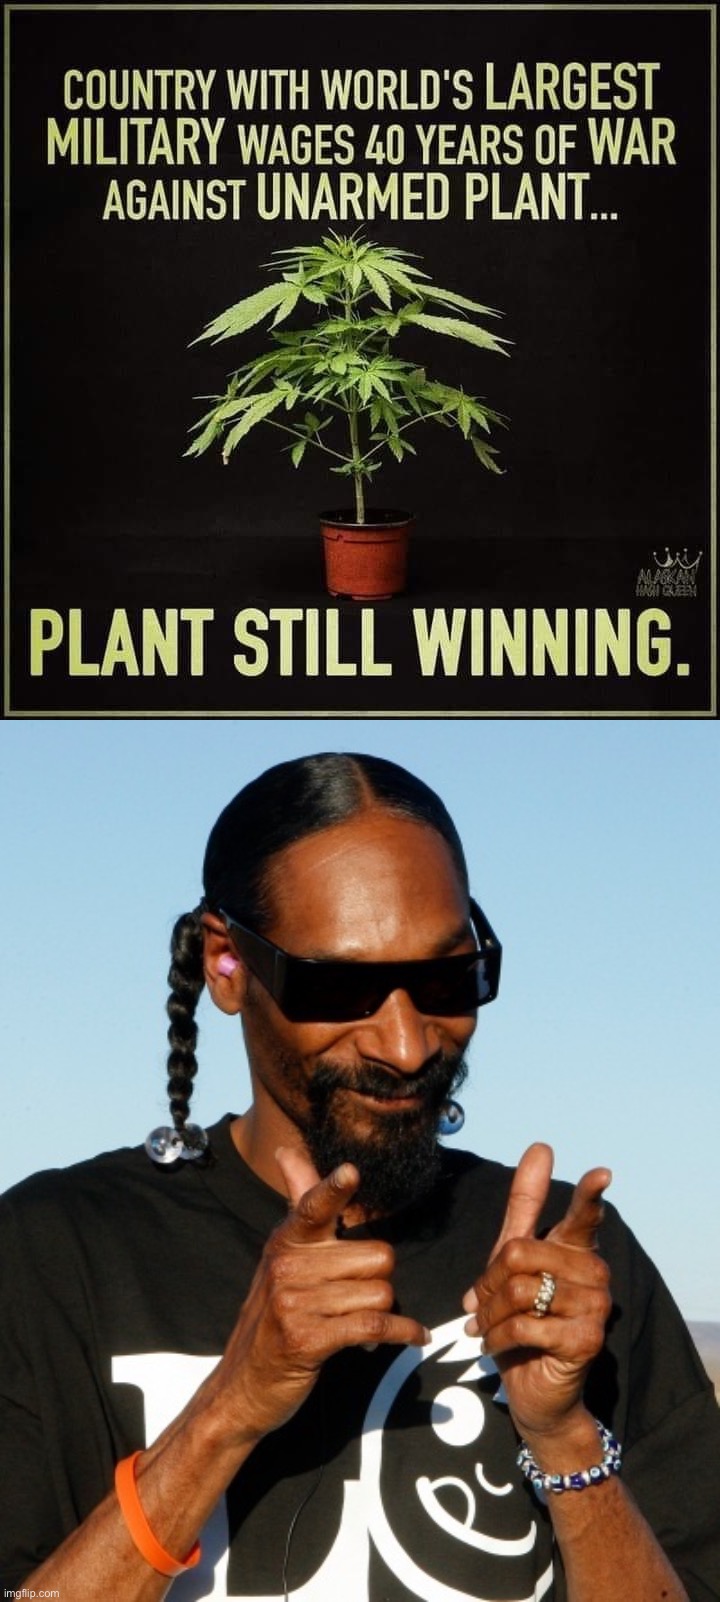 Snoop Dogg Approves | image tagged in plant still winning,snoop dogg approves,weed,smoke weed everyday,smoke weed,war on drugs | made w/ Imgflip meme maker